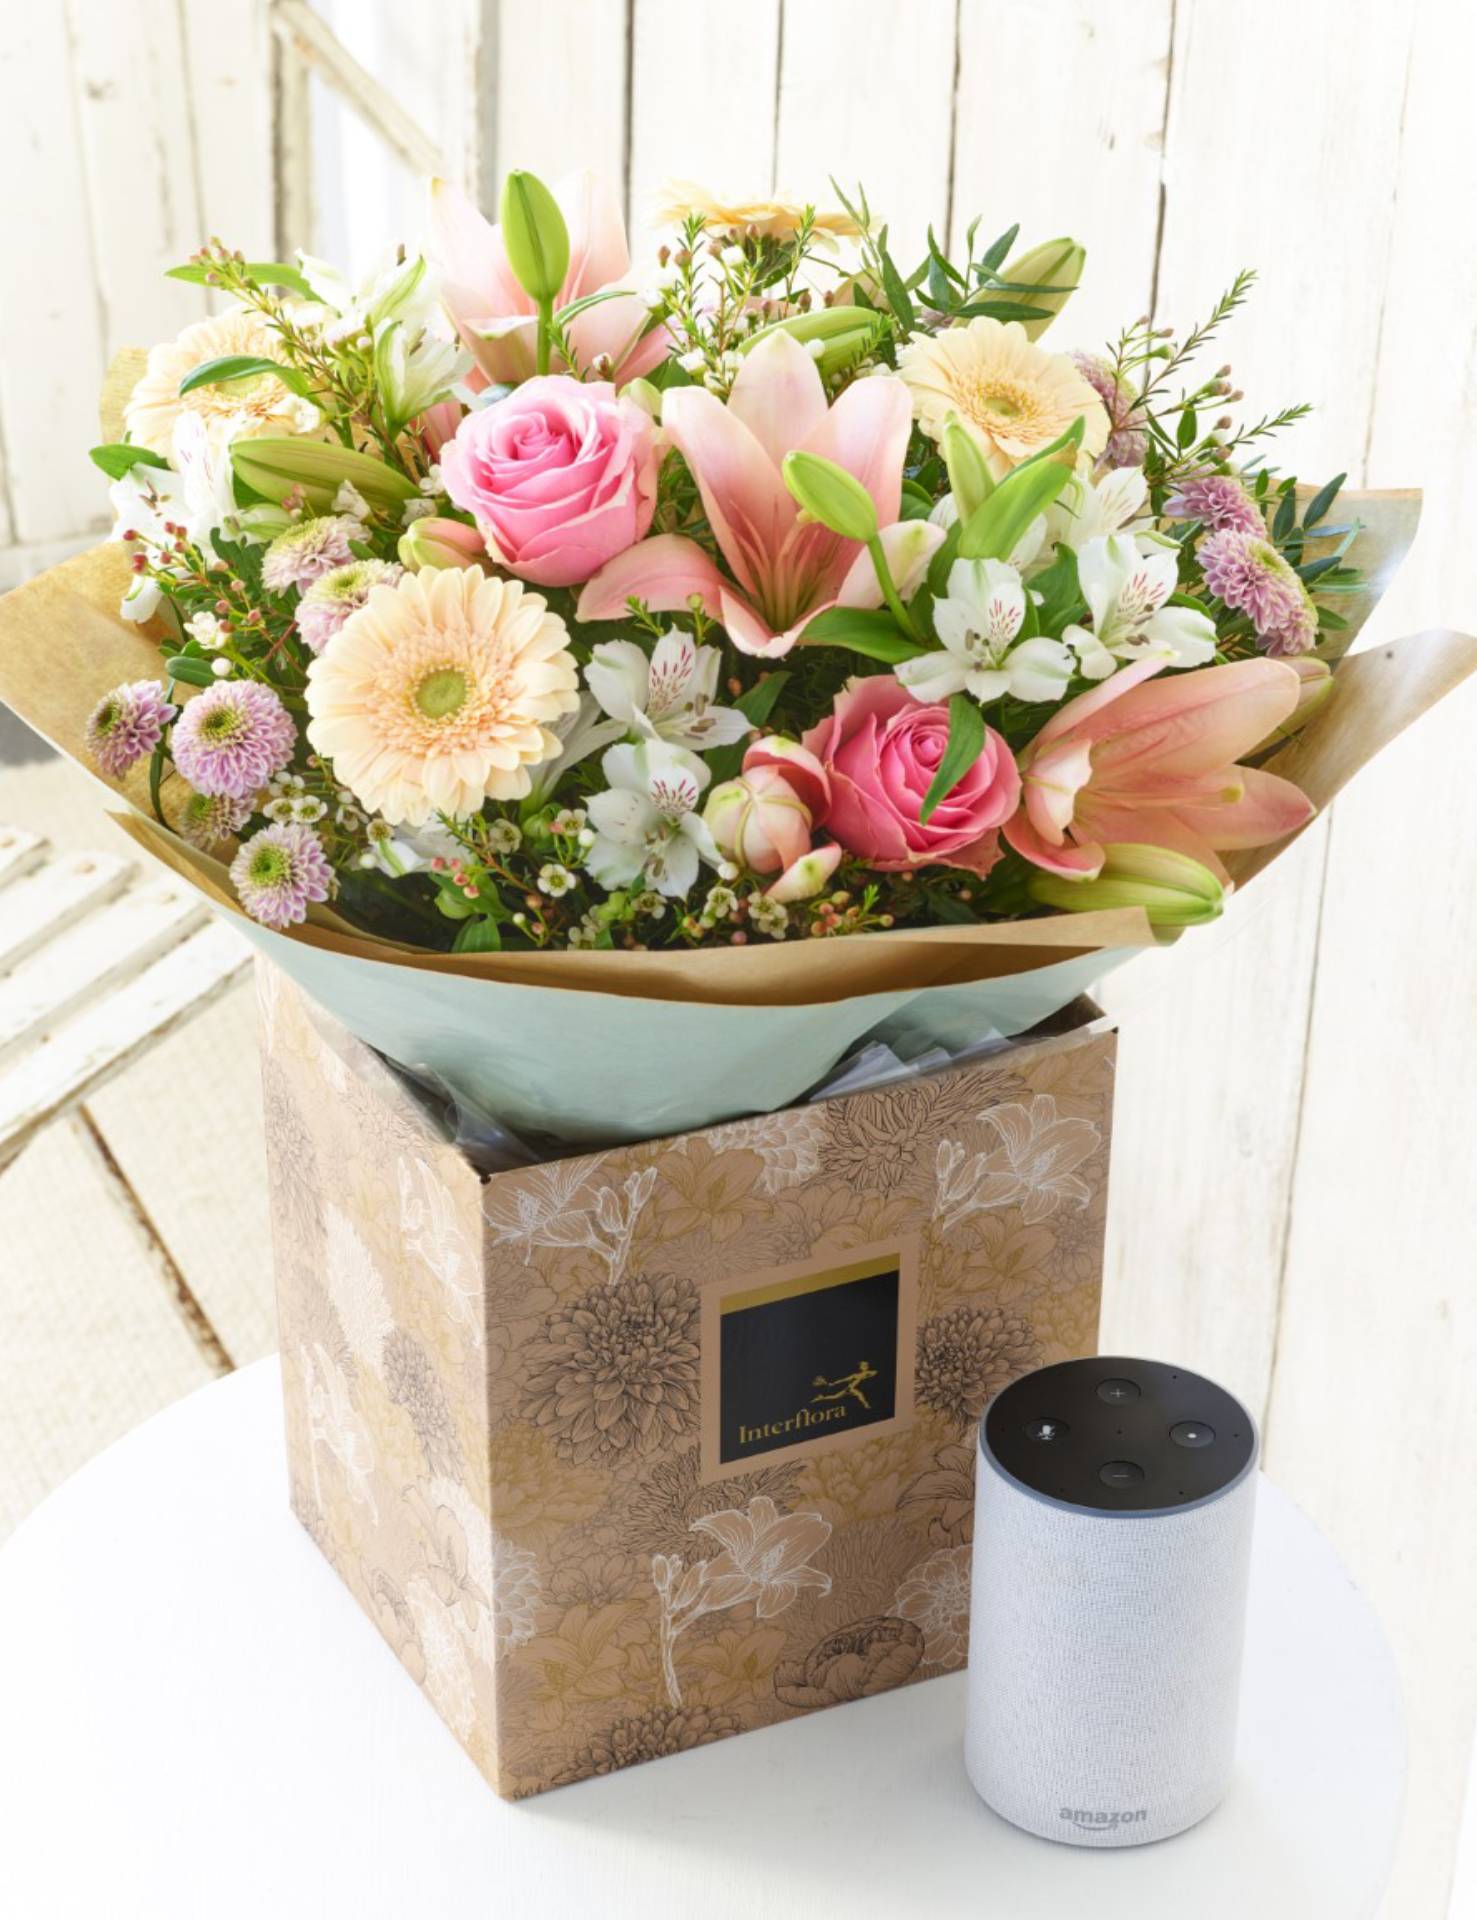 Flower delivery UK: the best flower delivery services for next day ...